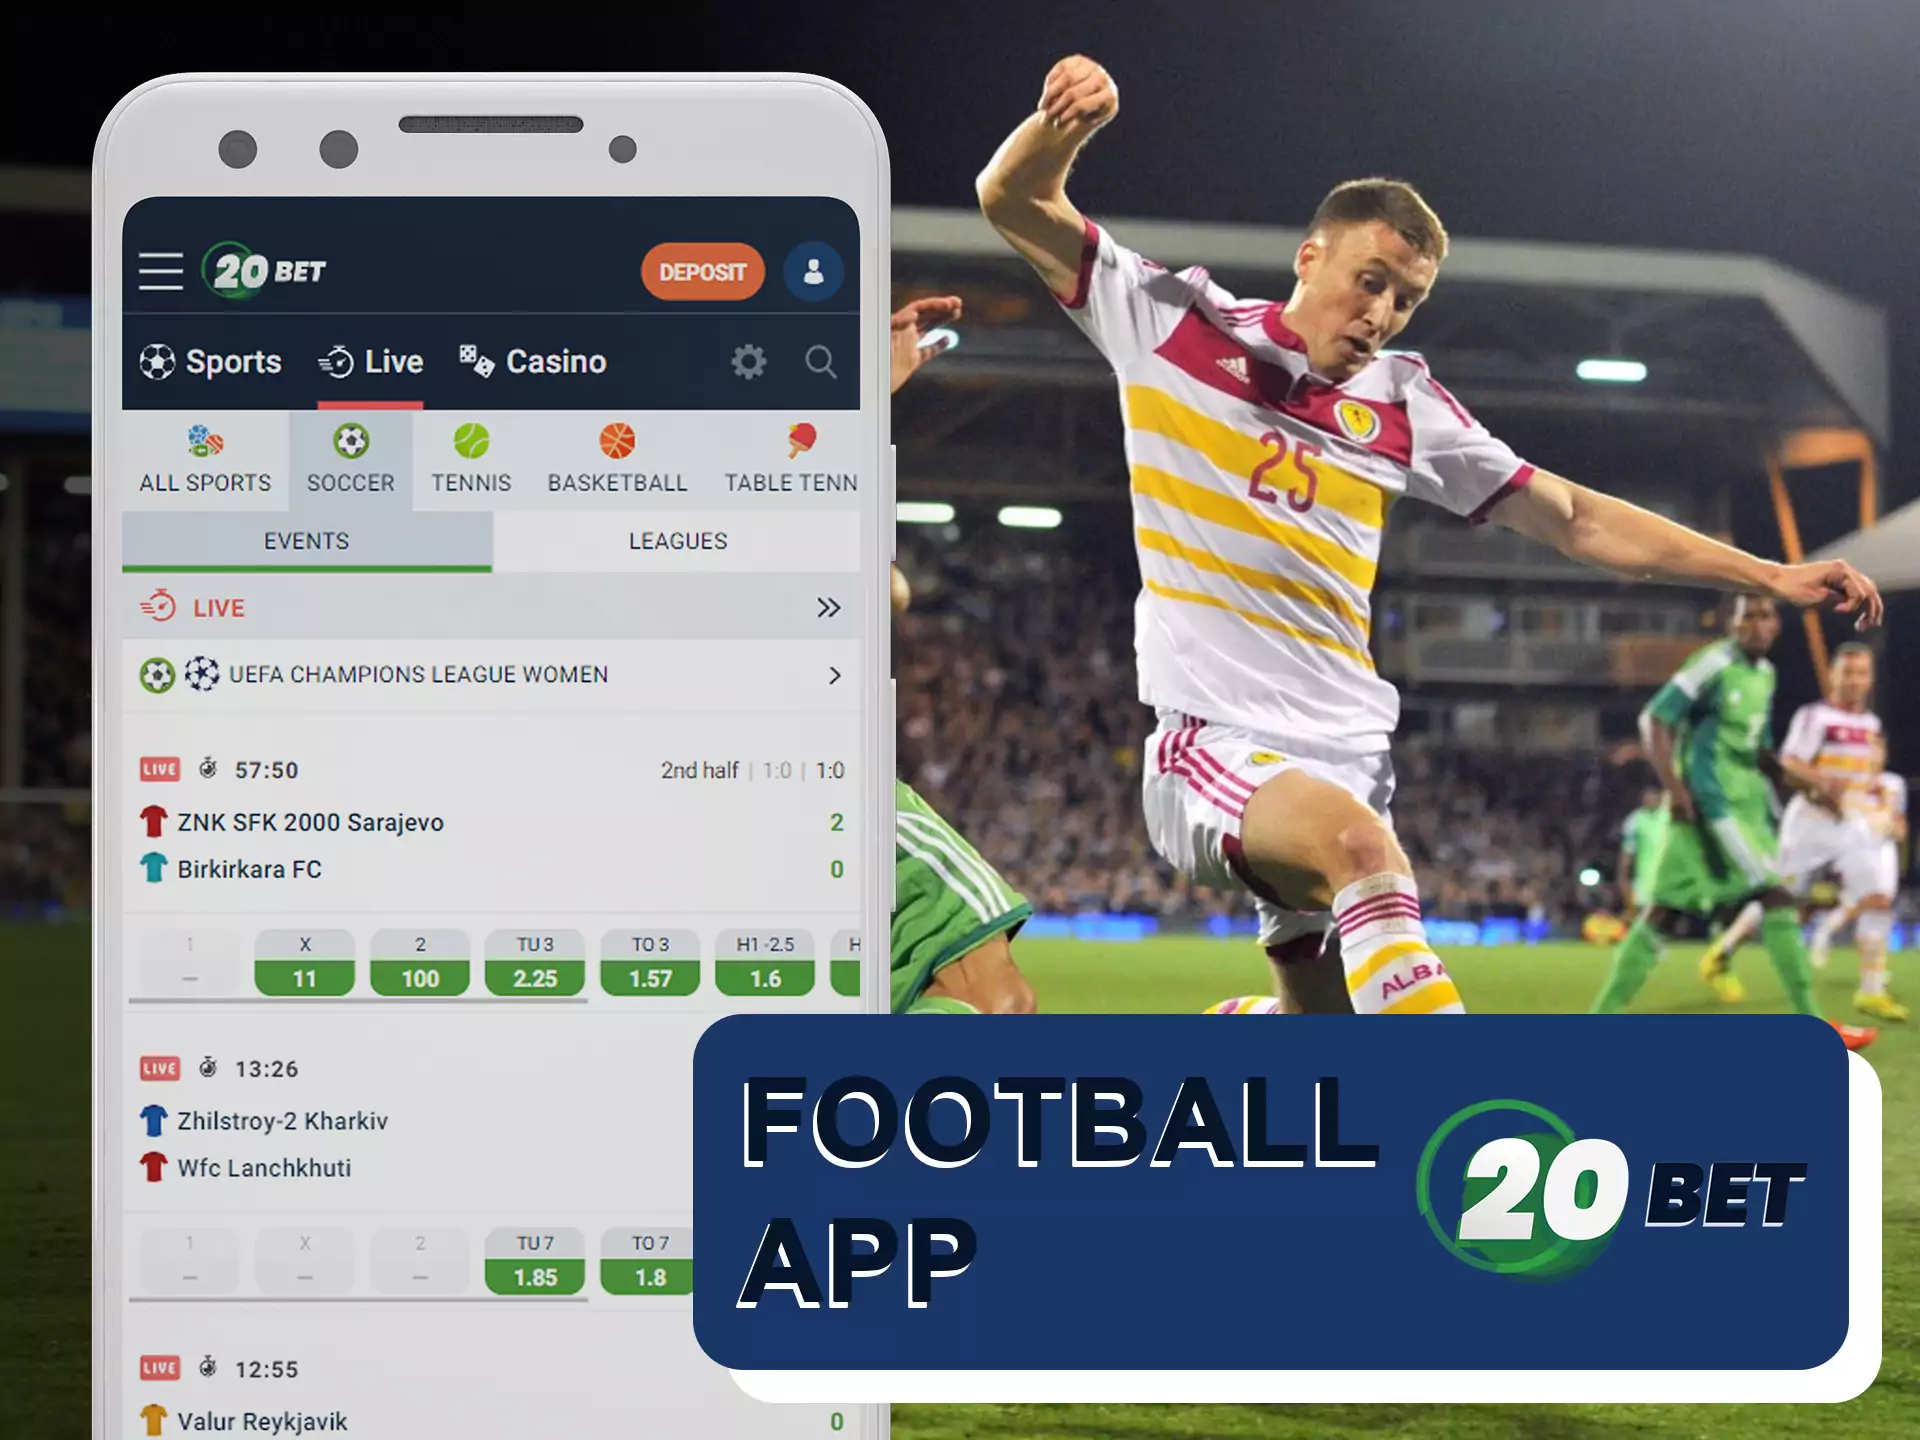 Watch andt bet on best football matches in 20bet app.